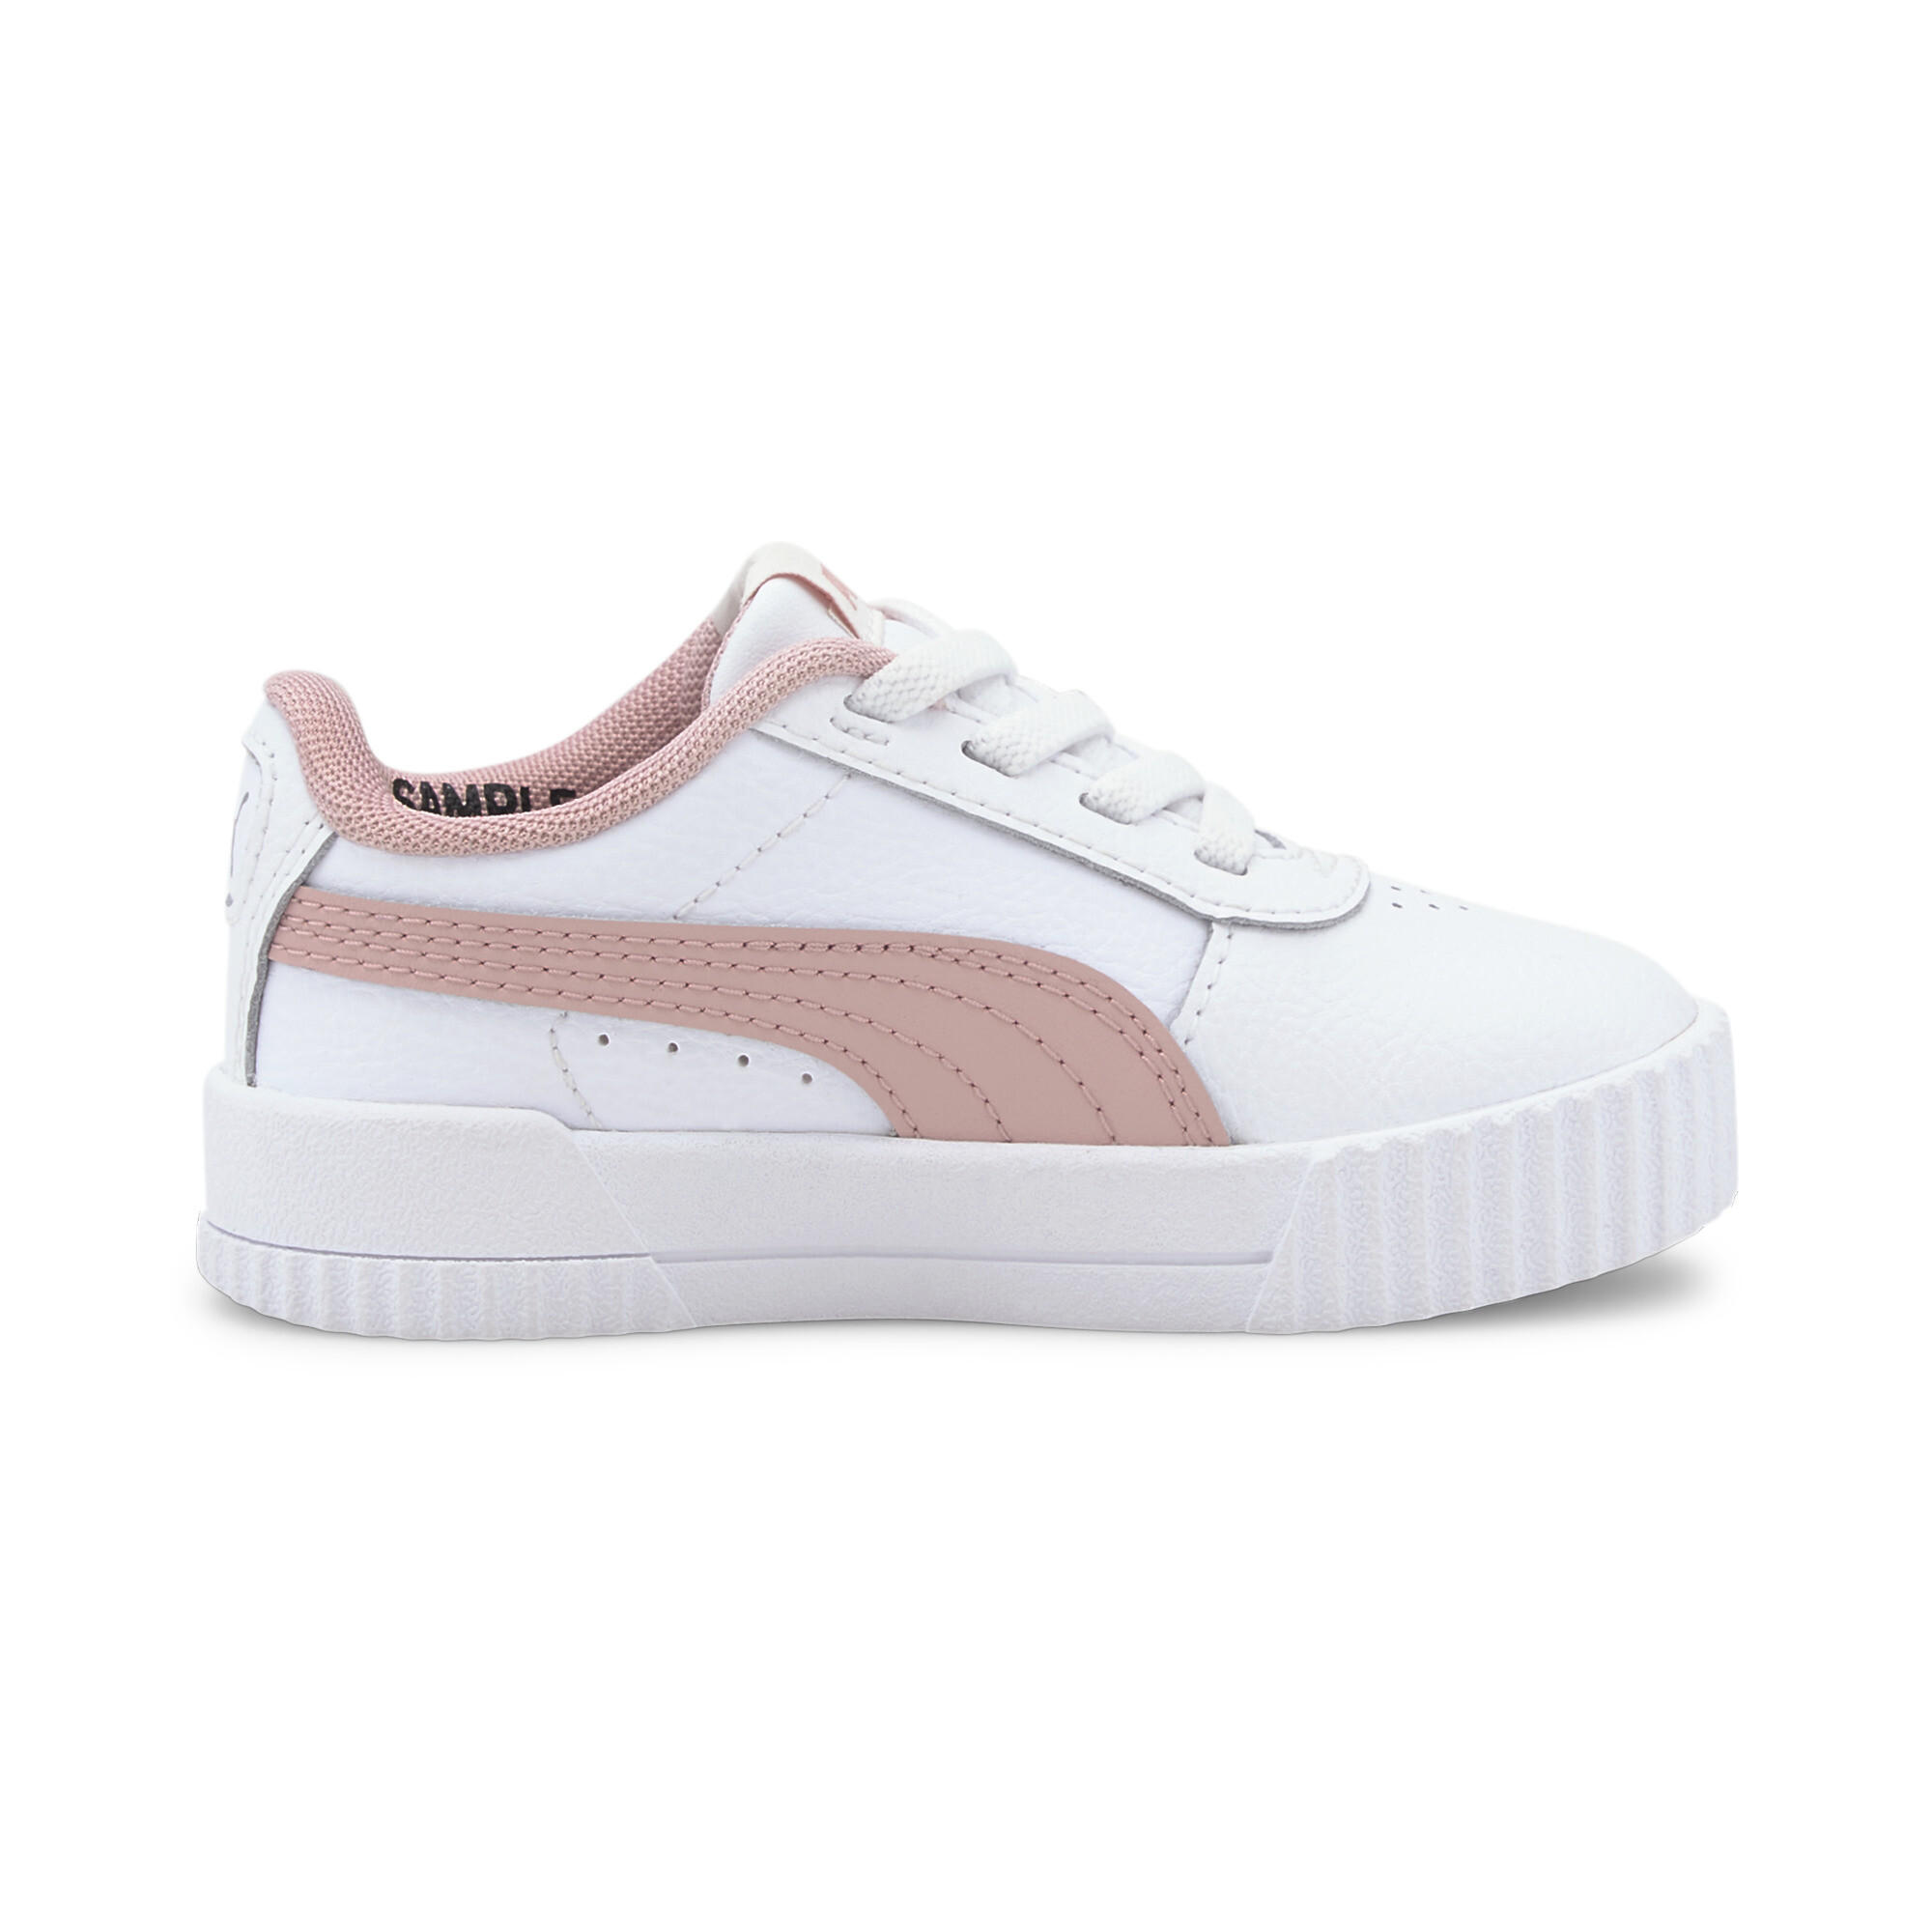 91  Carina leather puma shoes for Girls